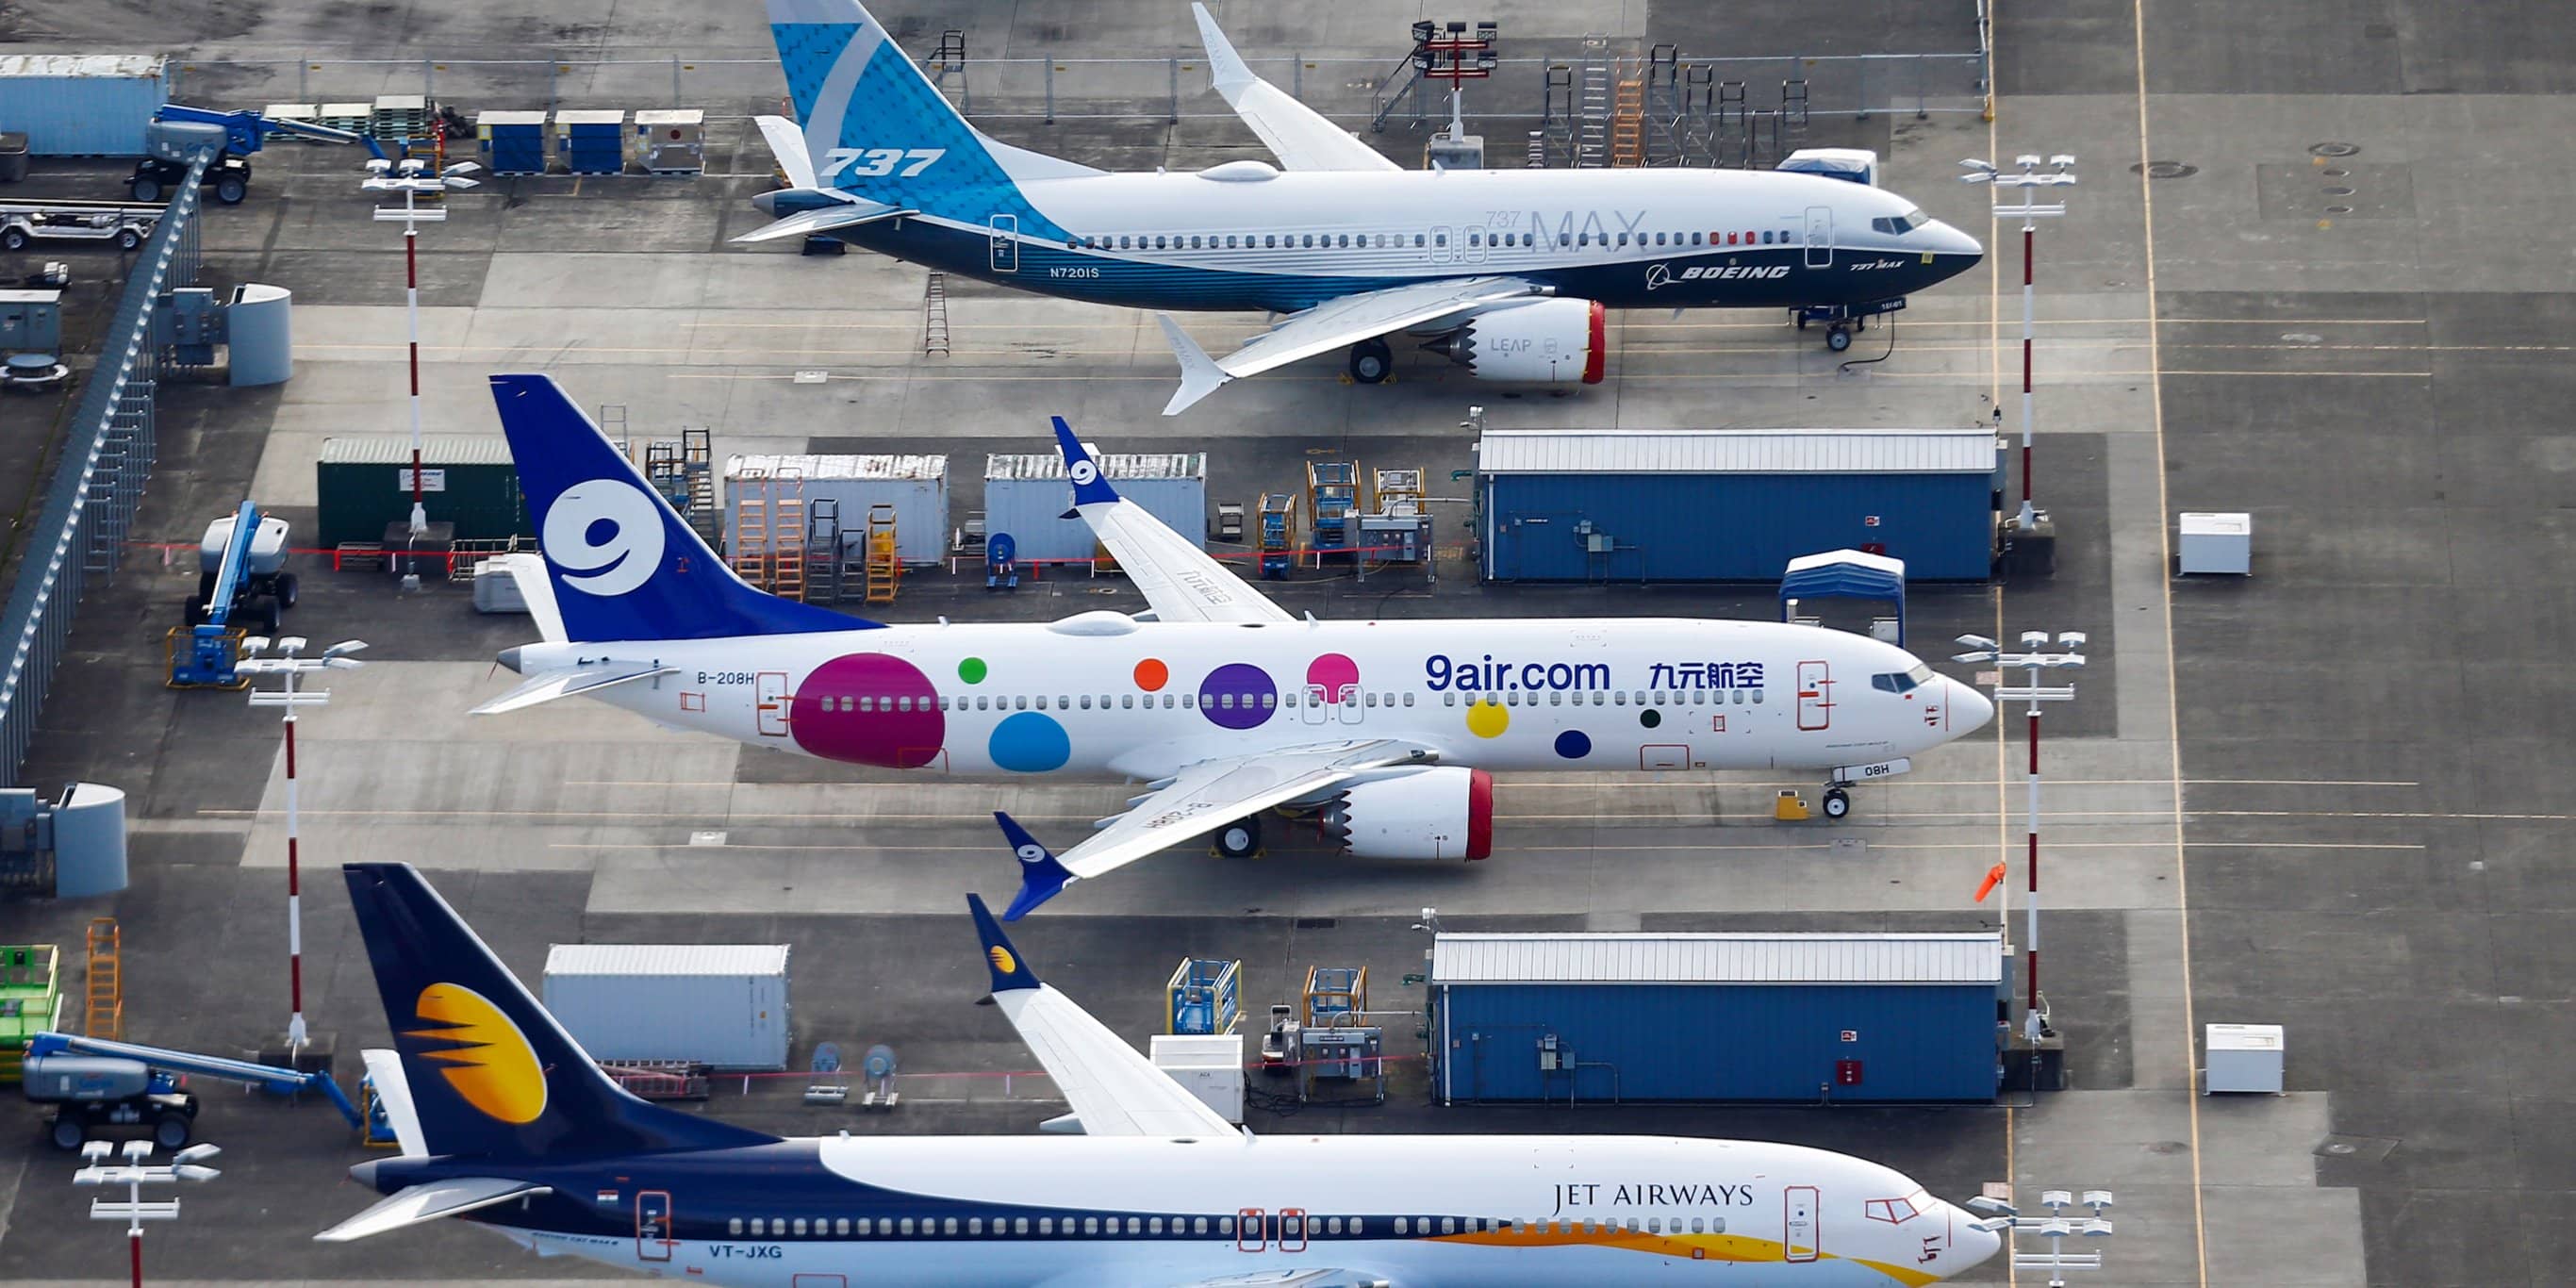 Boeing Has Run Out Of Space To Park The Grounded 737 MAX 8 Jets